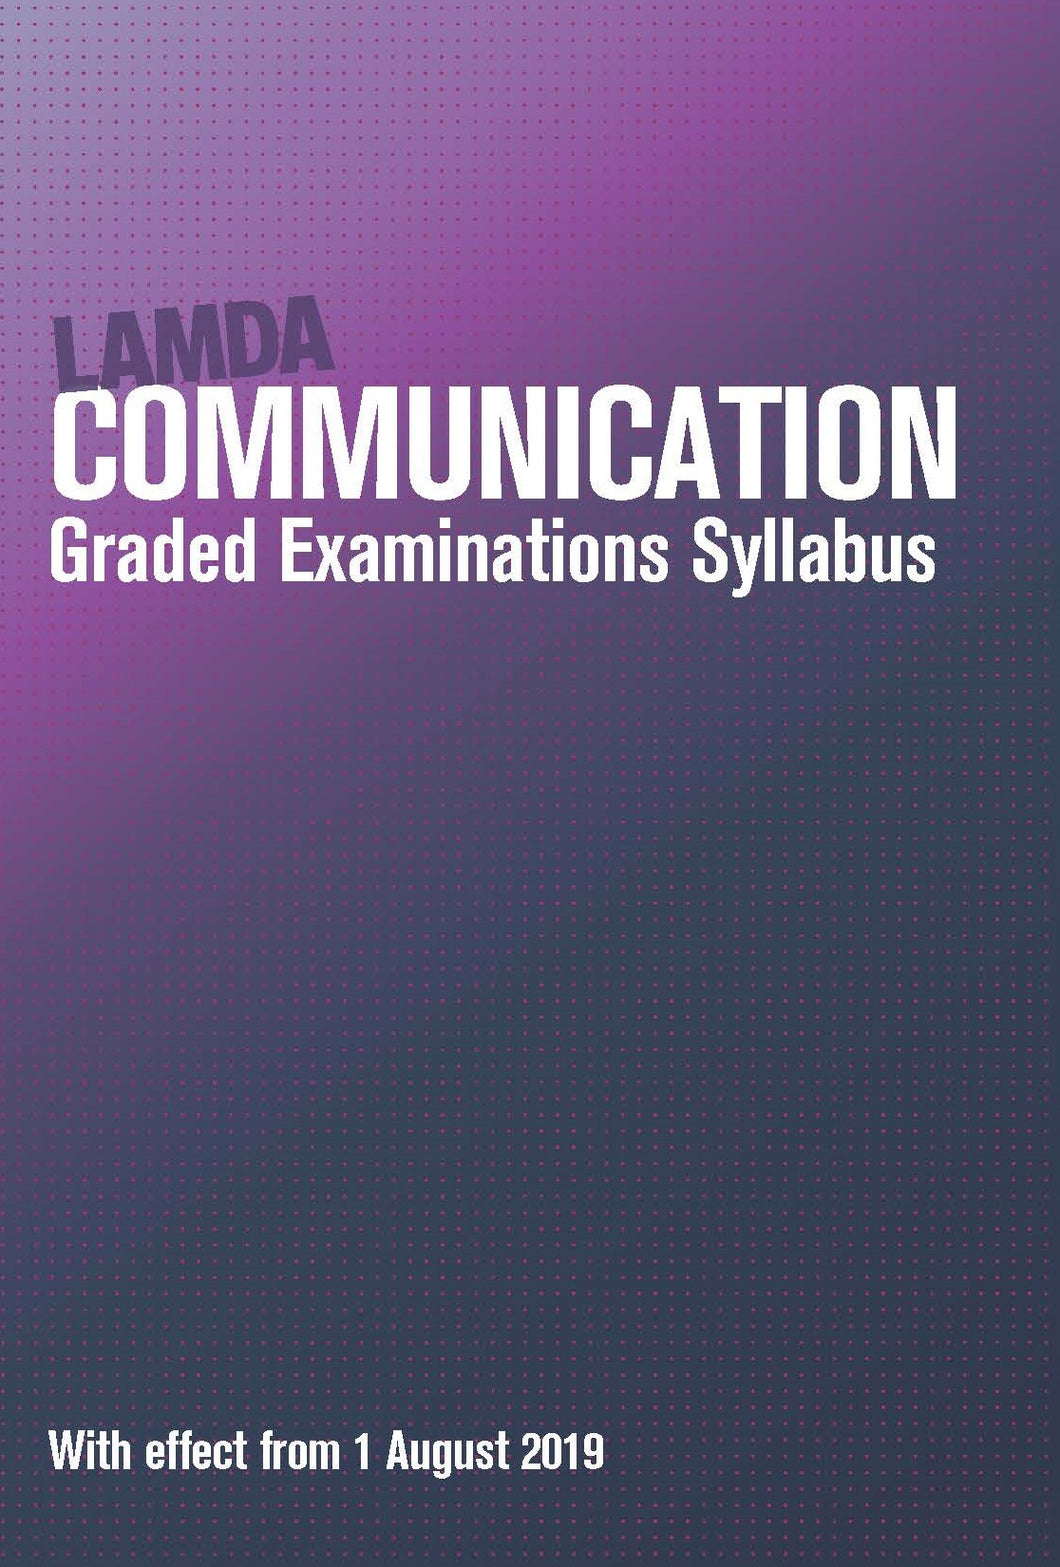 Communication syllabus - with effect from 1 August 2019